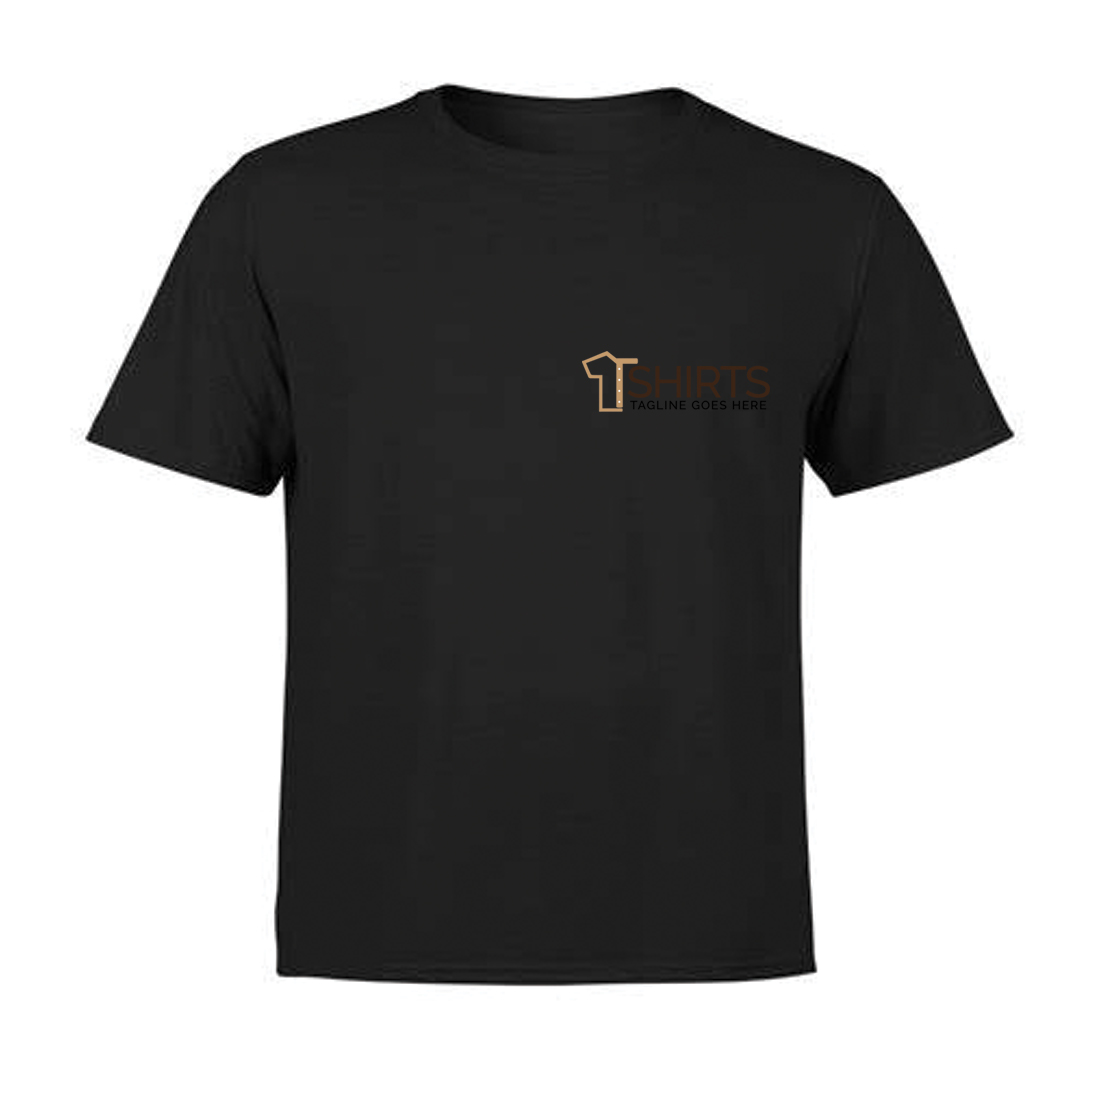 Image of a t-shirt with a wonderful logo